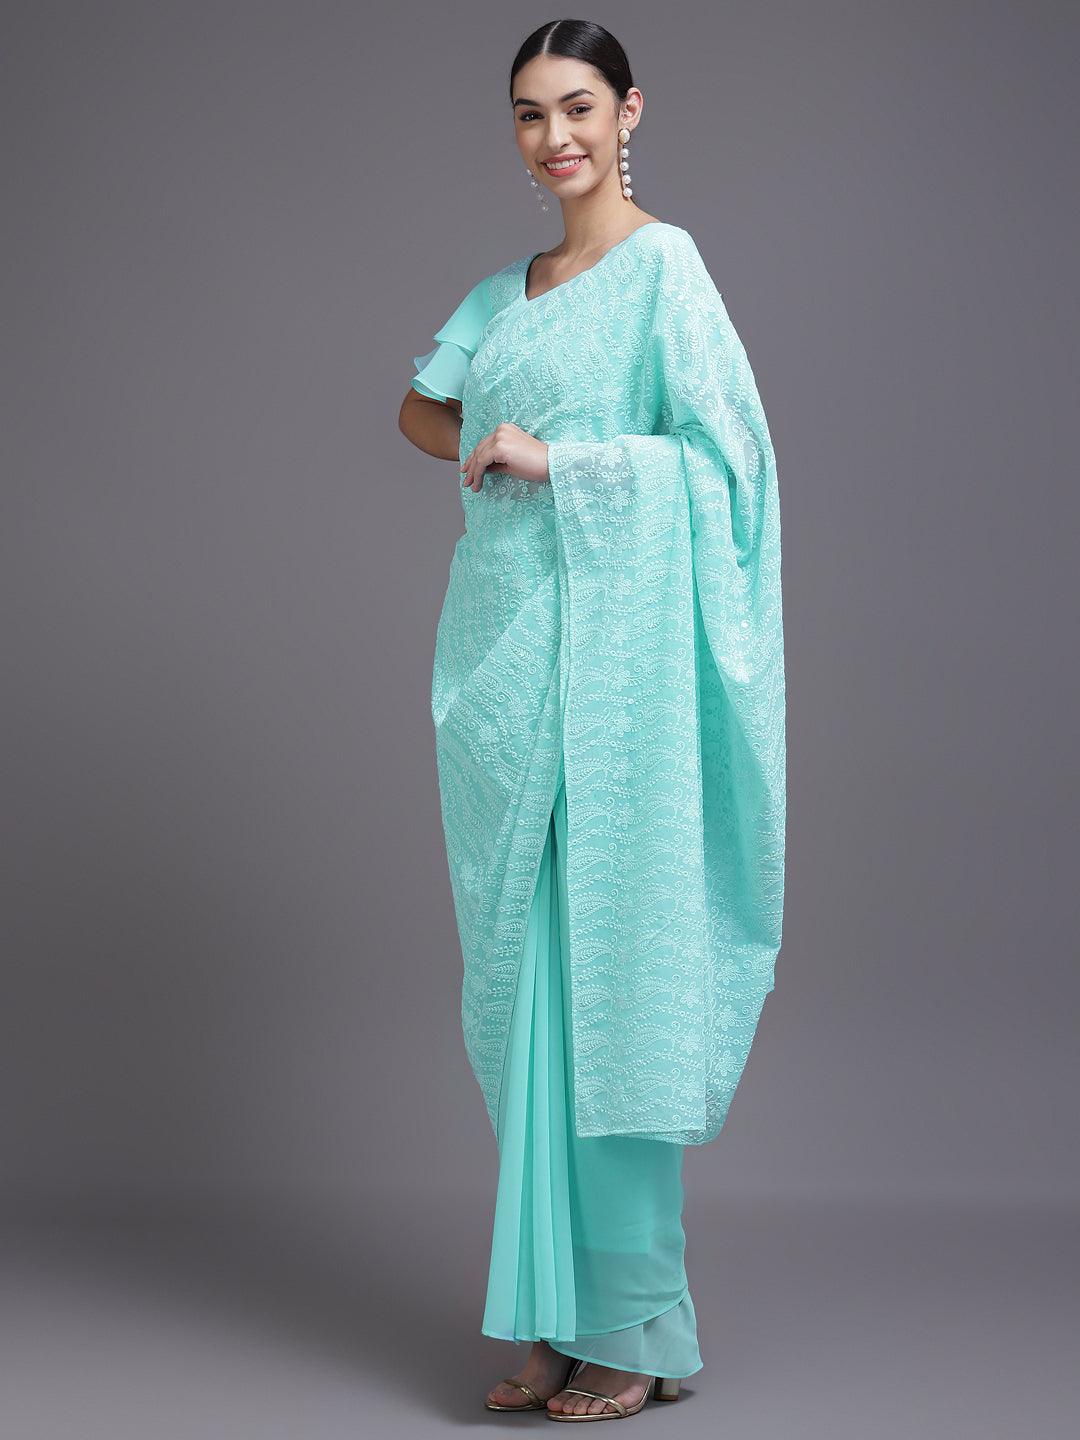 Turquoise Blue Embroidered Georgette Saree - Libas